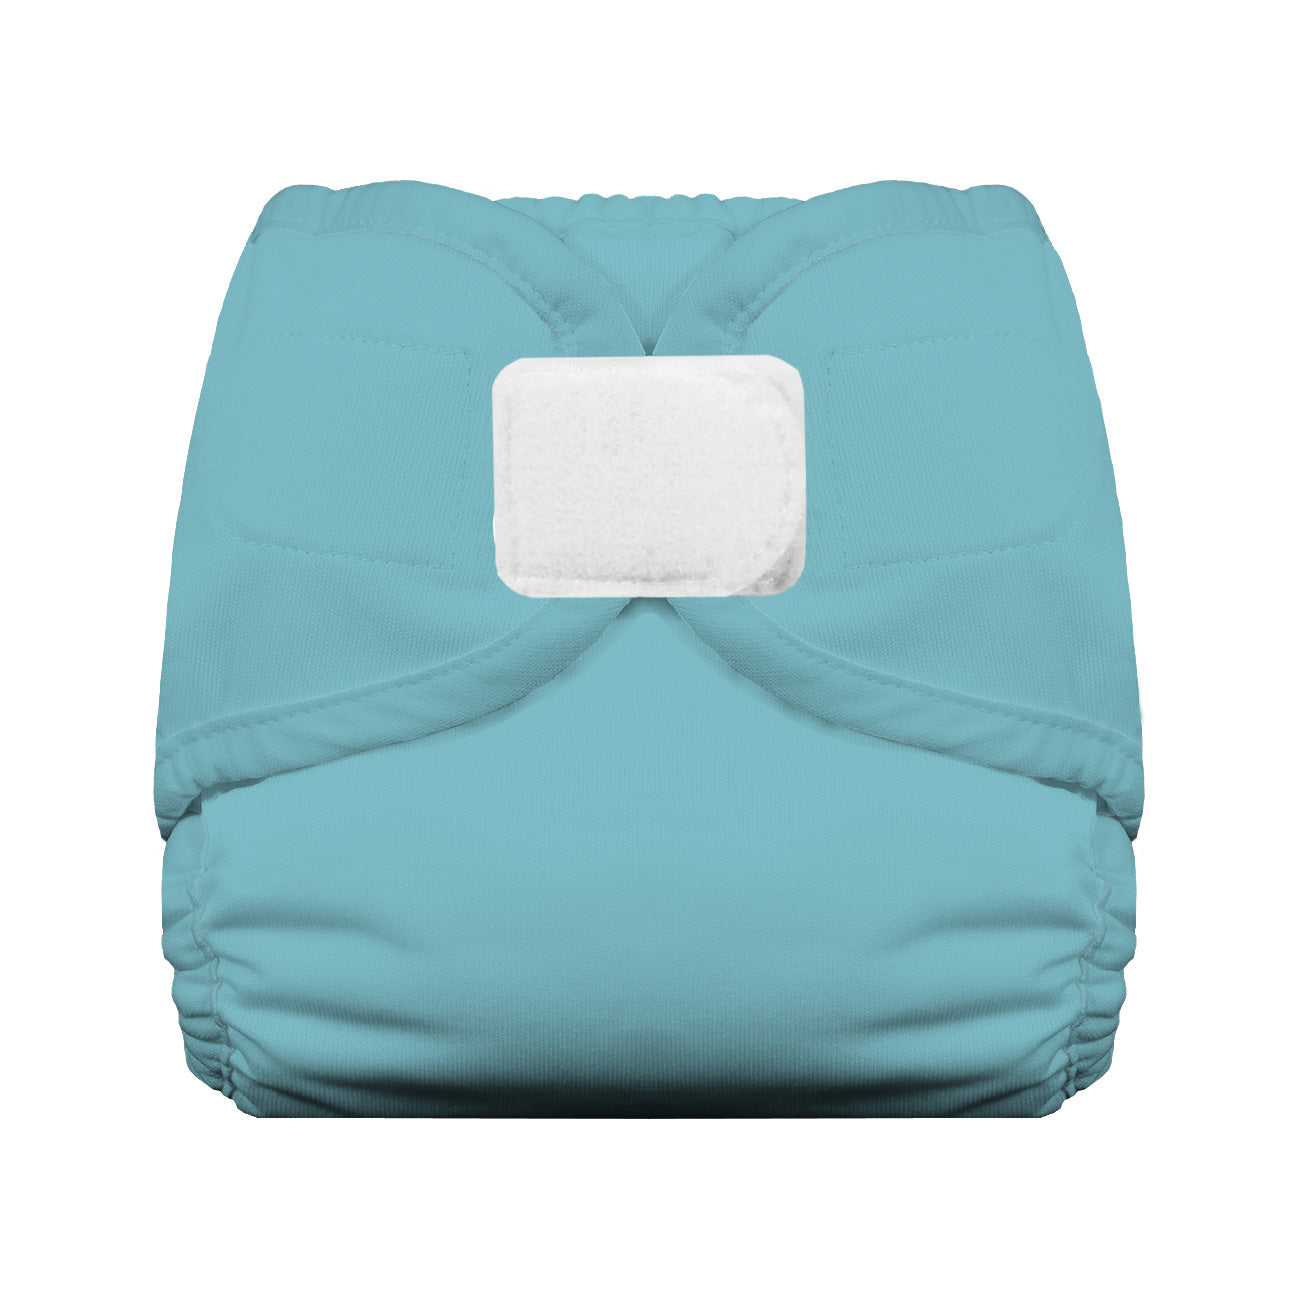 Image of Thirsties Diaper Cover with Hook and Loop in Maui